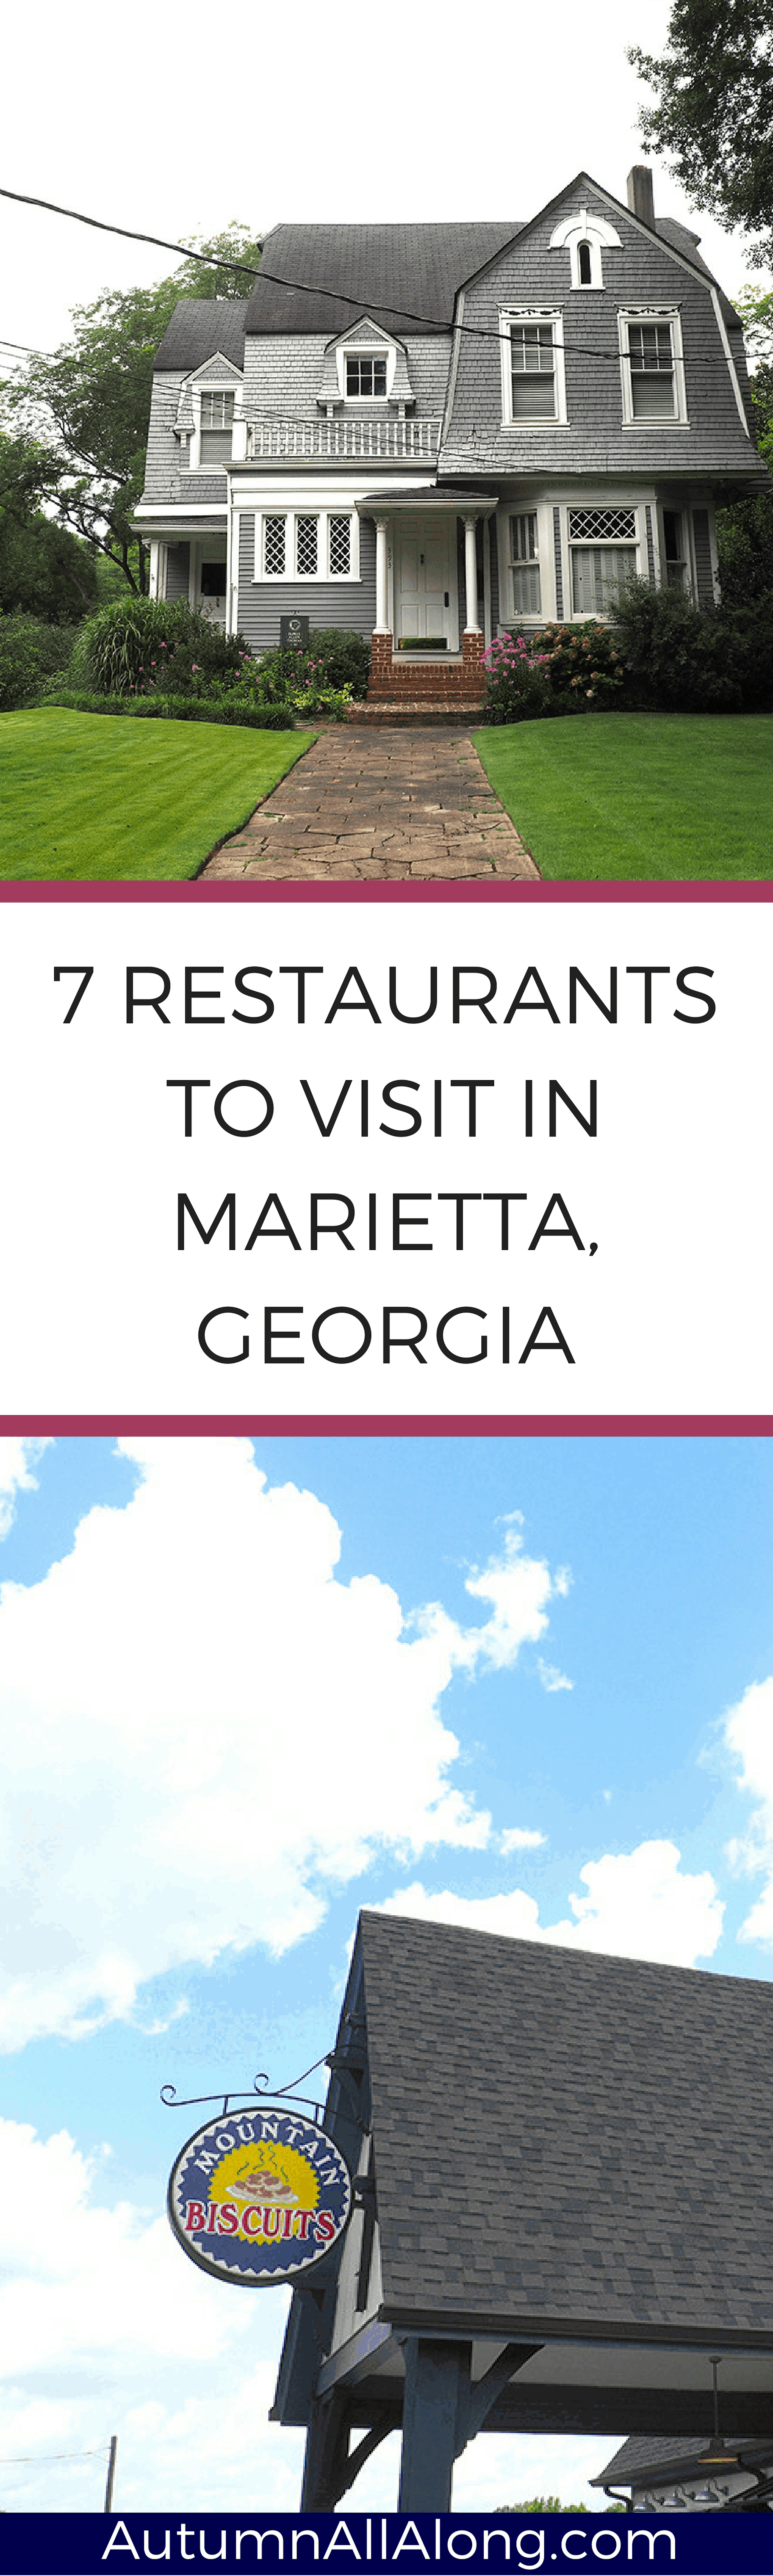 After living in Marietta, Georgia for 5 years, these are my 7 restaurants that I could visit over and over again. | via Autumn All Along